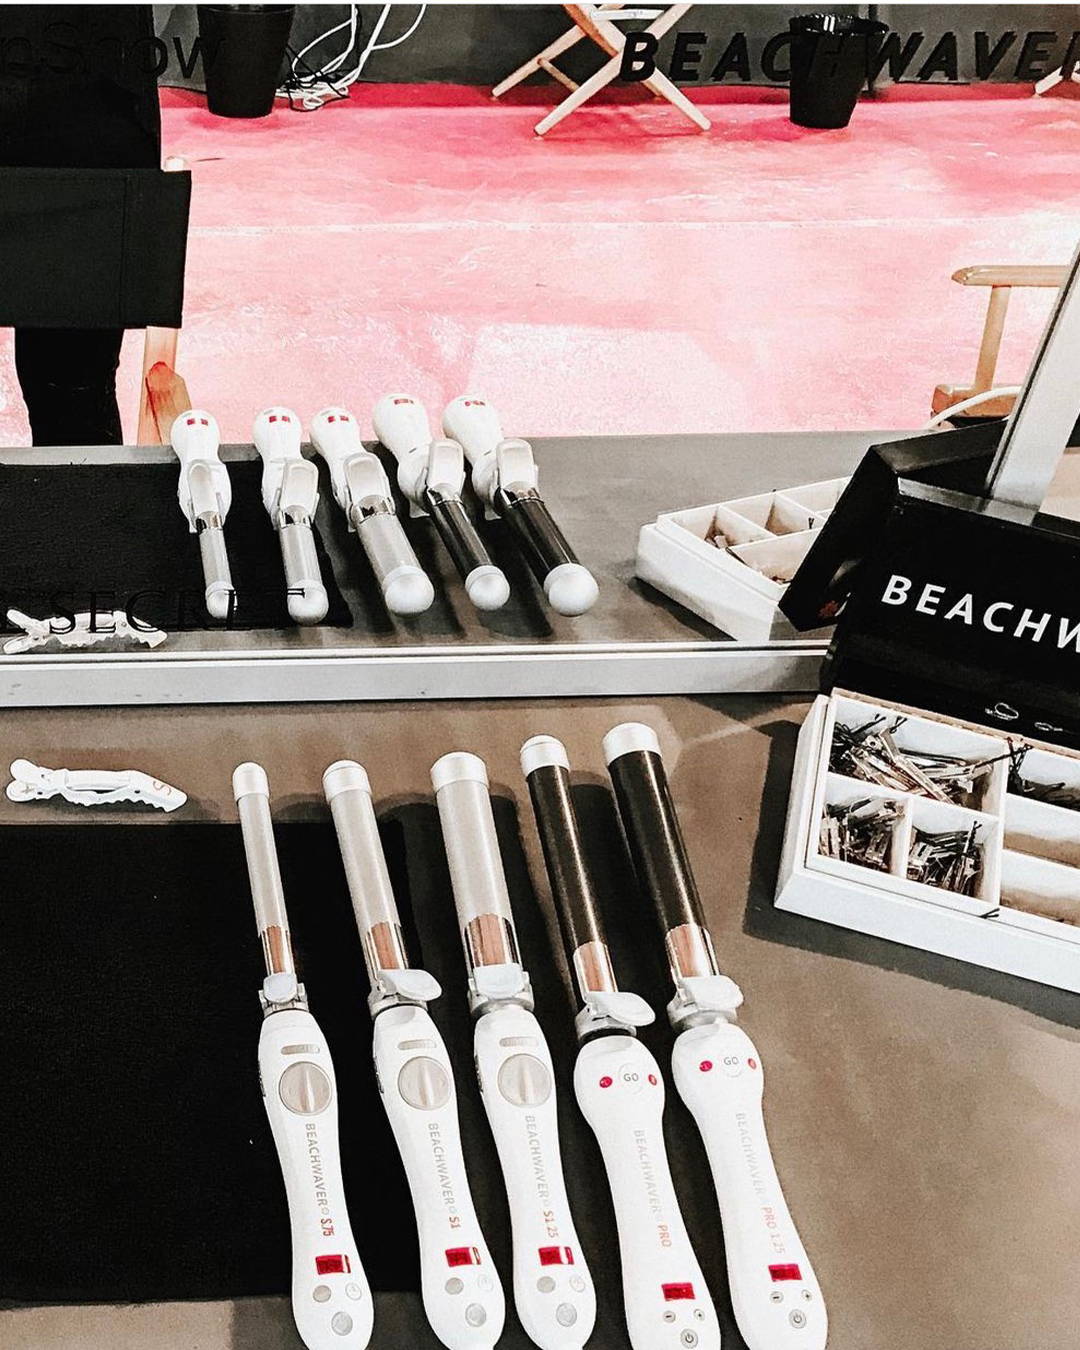 Image of Beachwaver Tools lined up backstage 